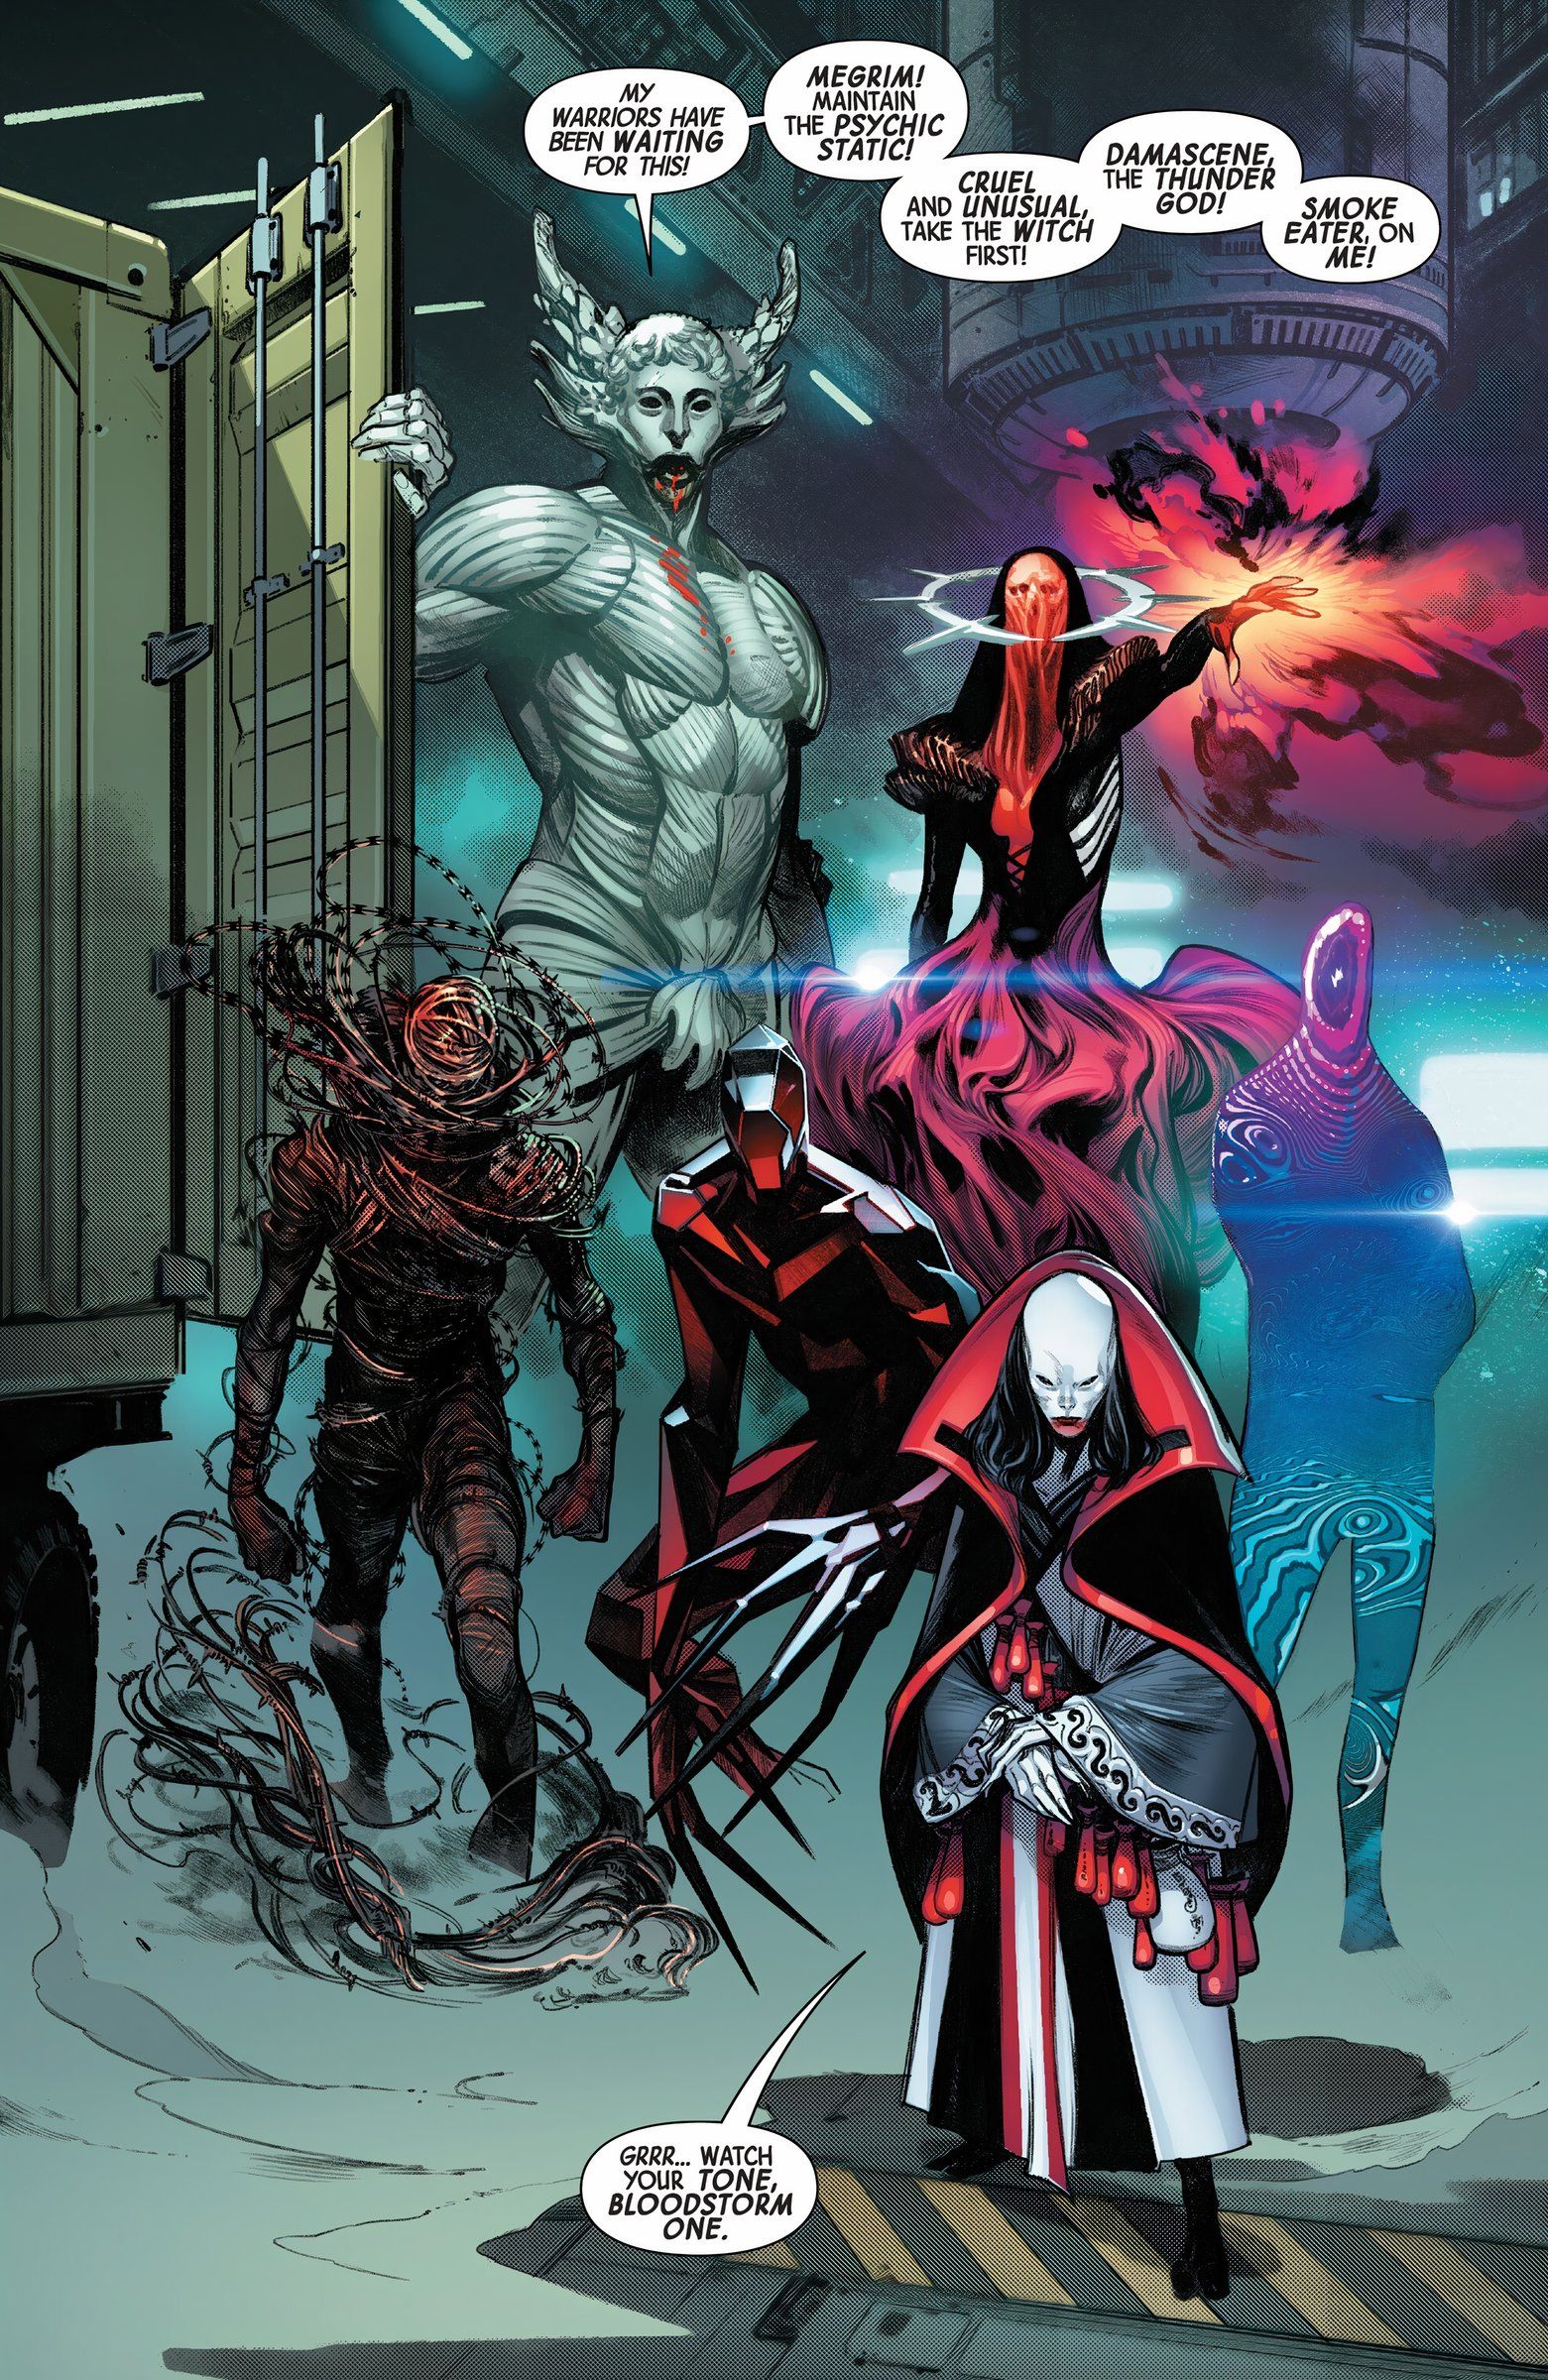 Six members of the Bloodcoven stand together and receive orders from Bloodstorm One.